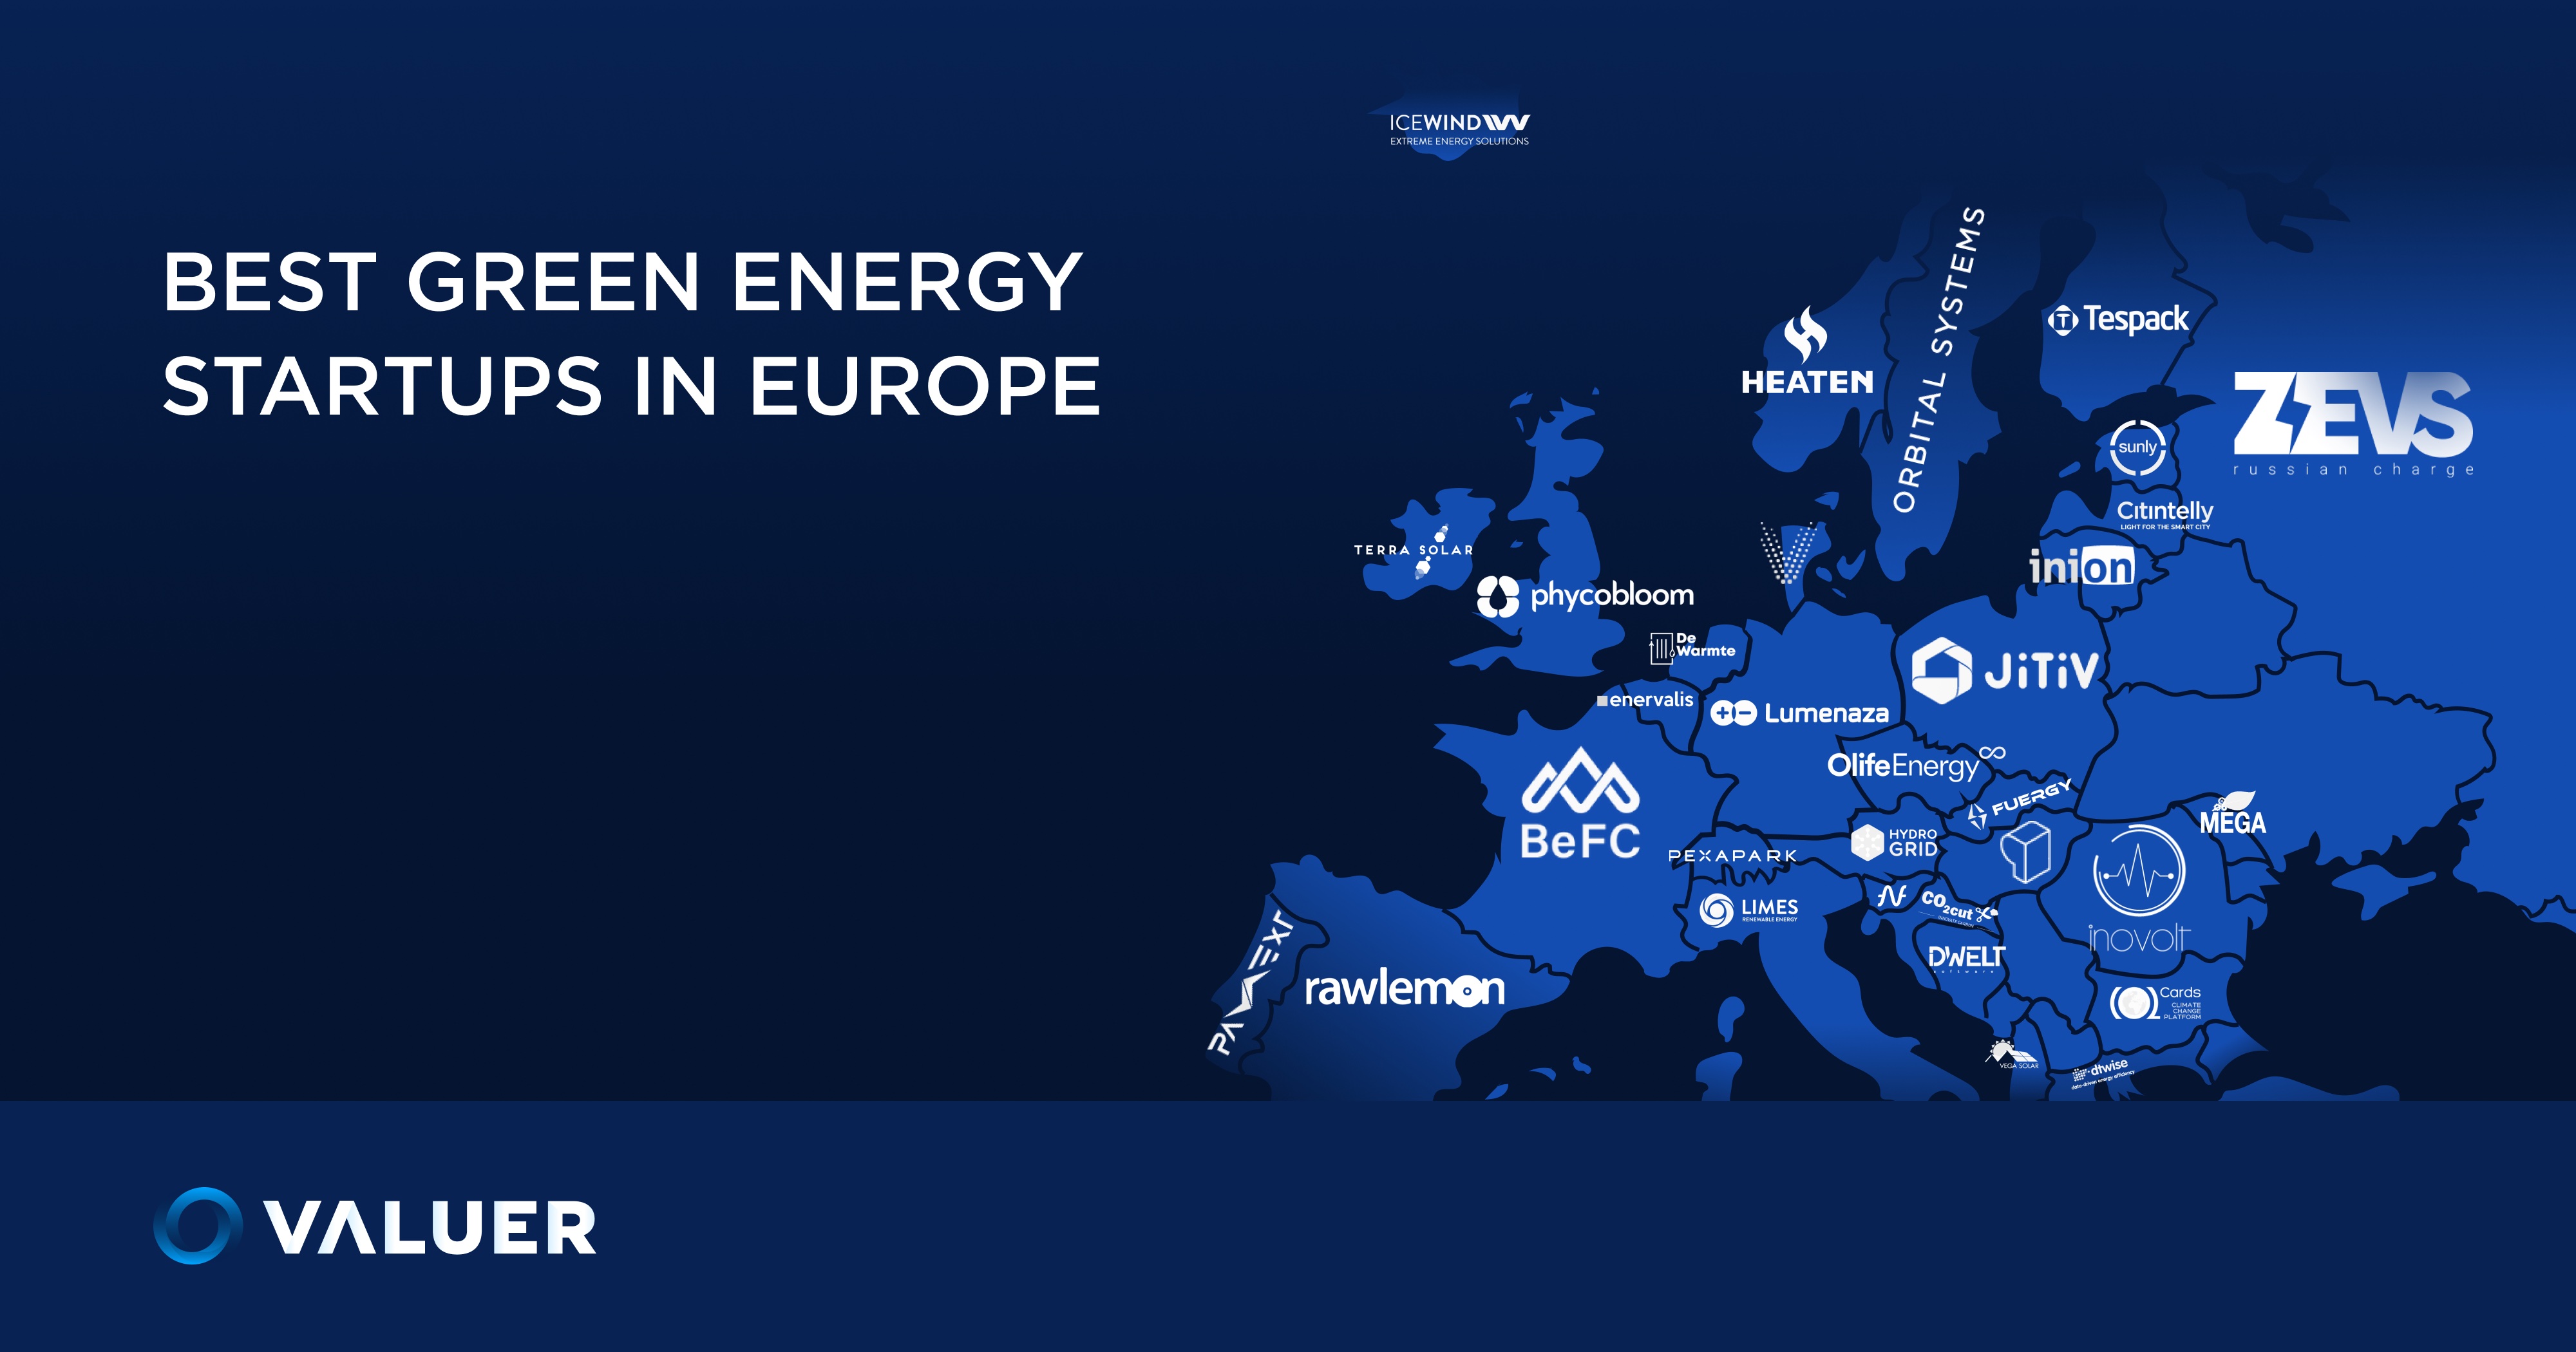 The Best Green Energy Startups in Europe